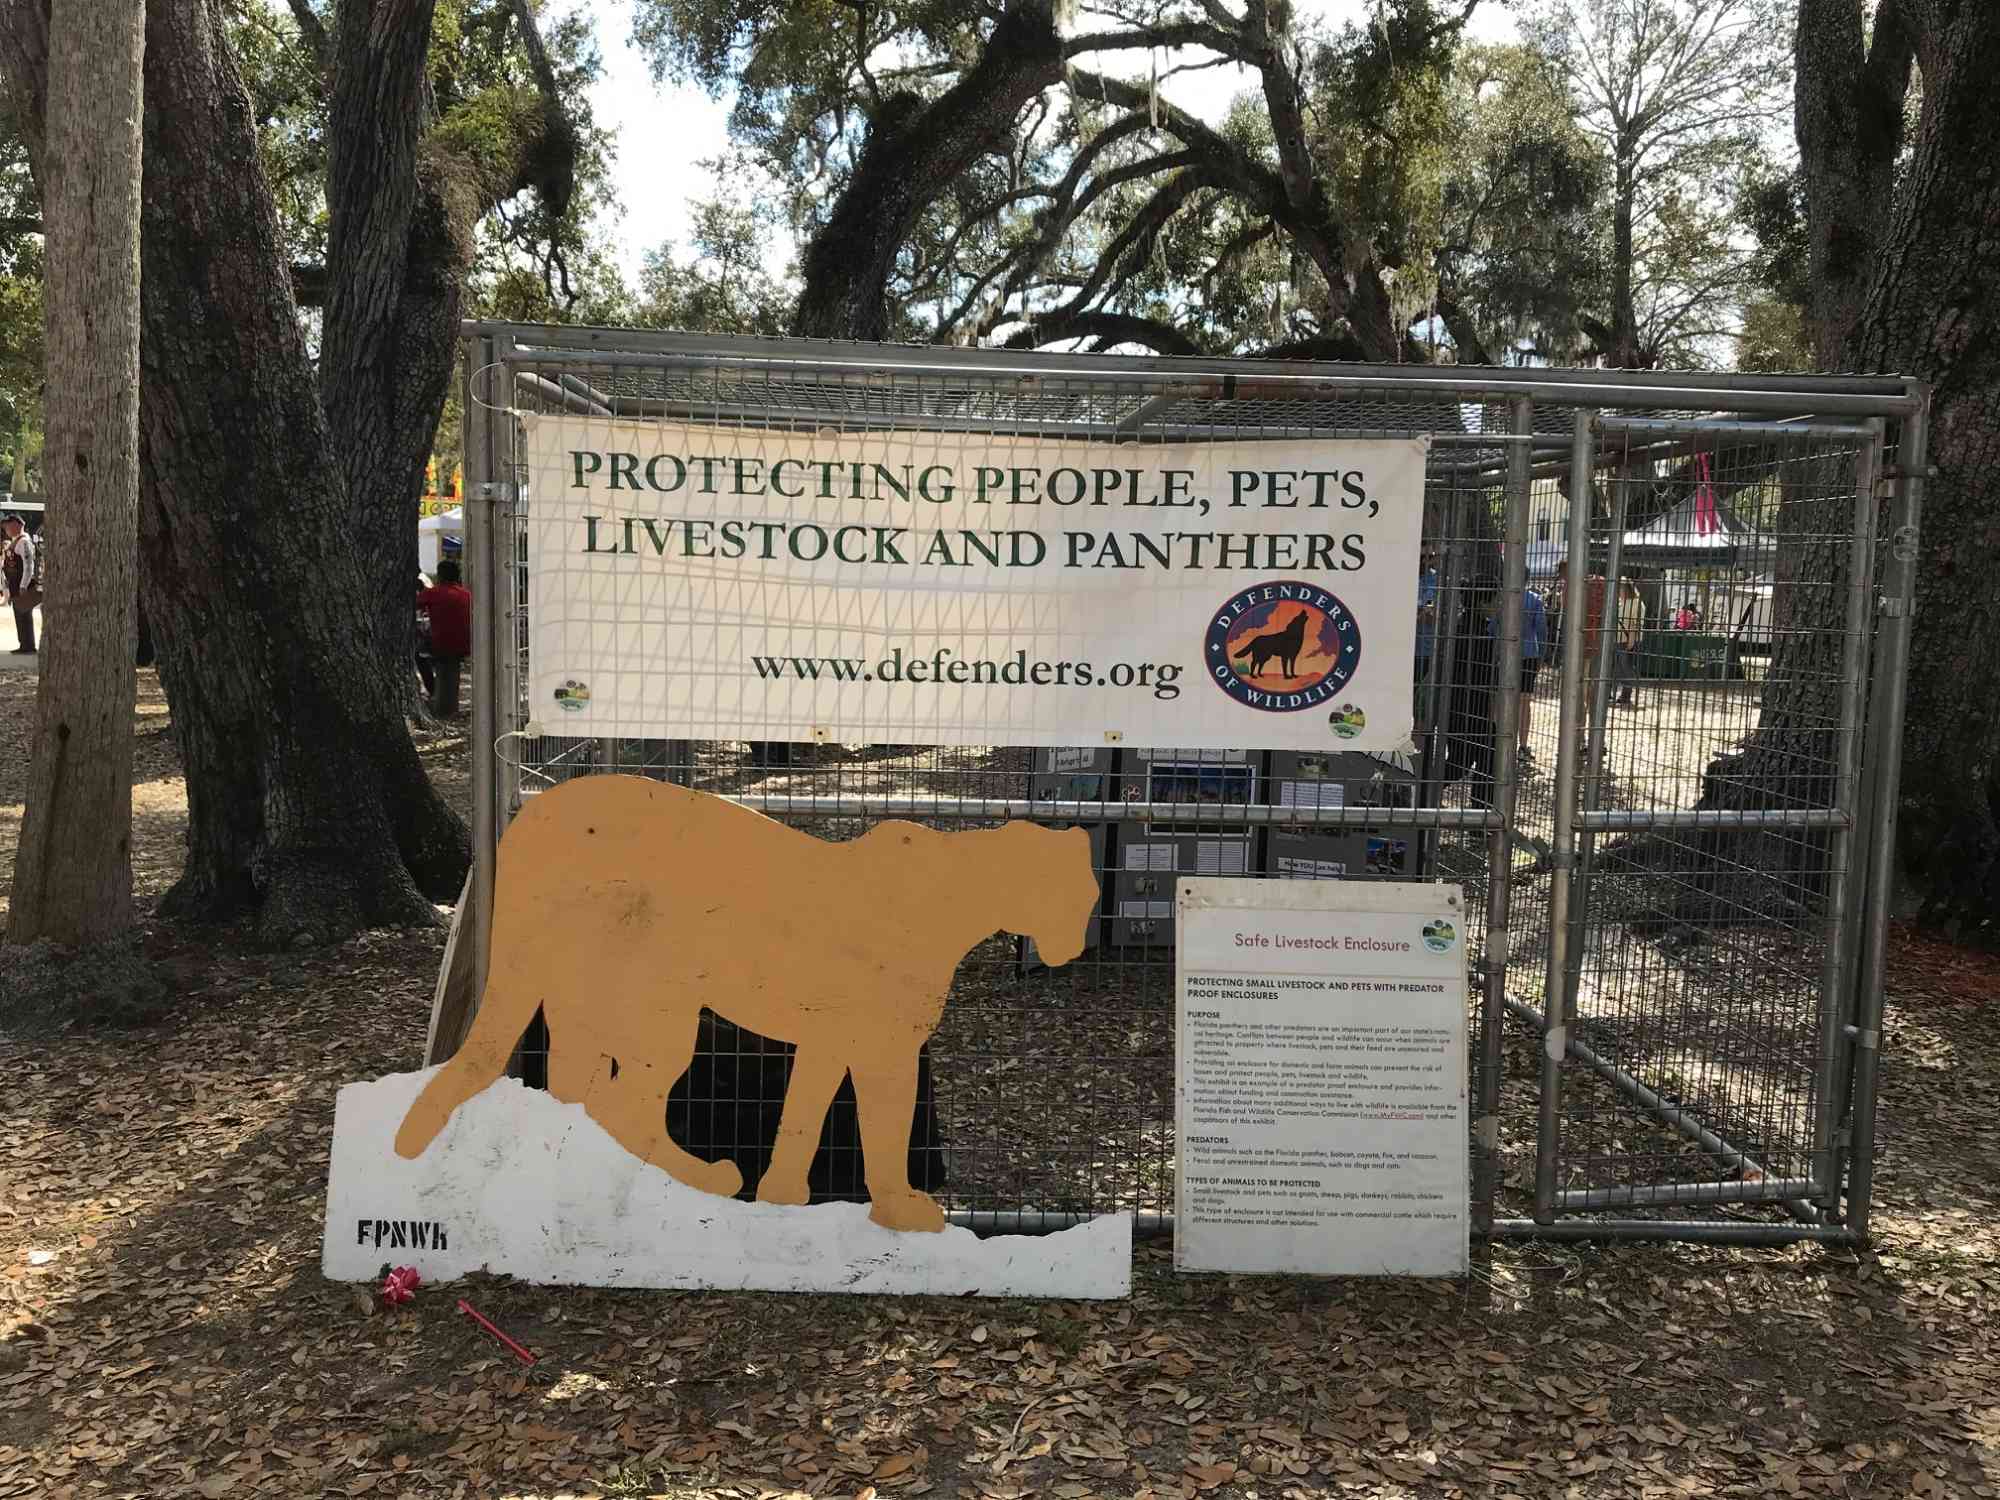 Panther Enclosure at the Swamp Cabbage Festival in LaBelle, Florida